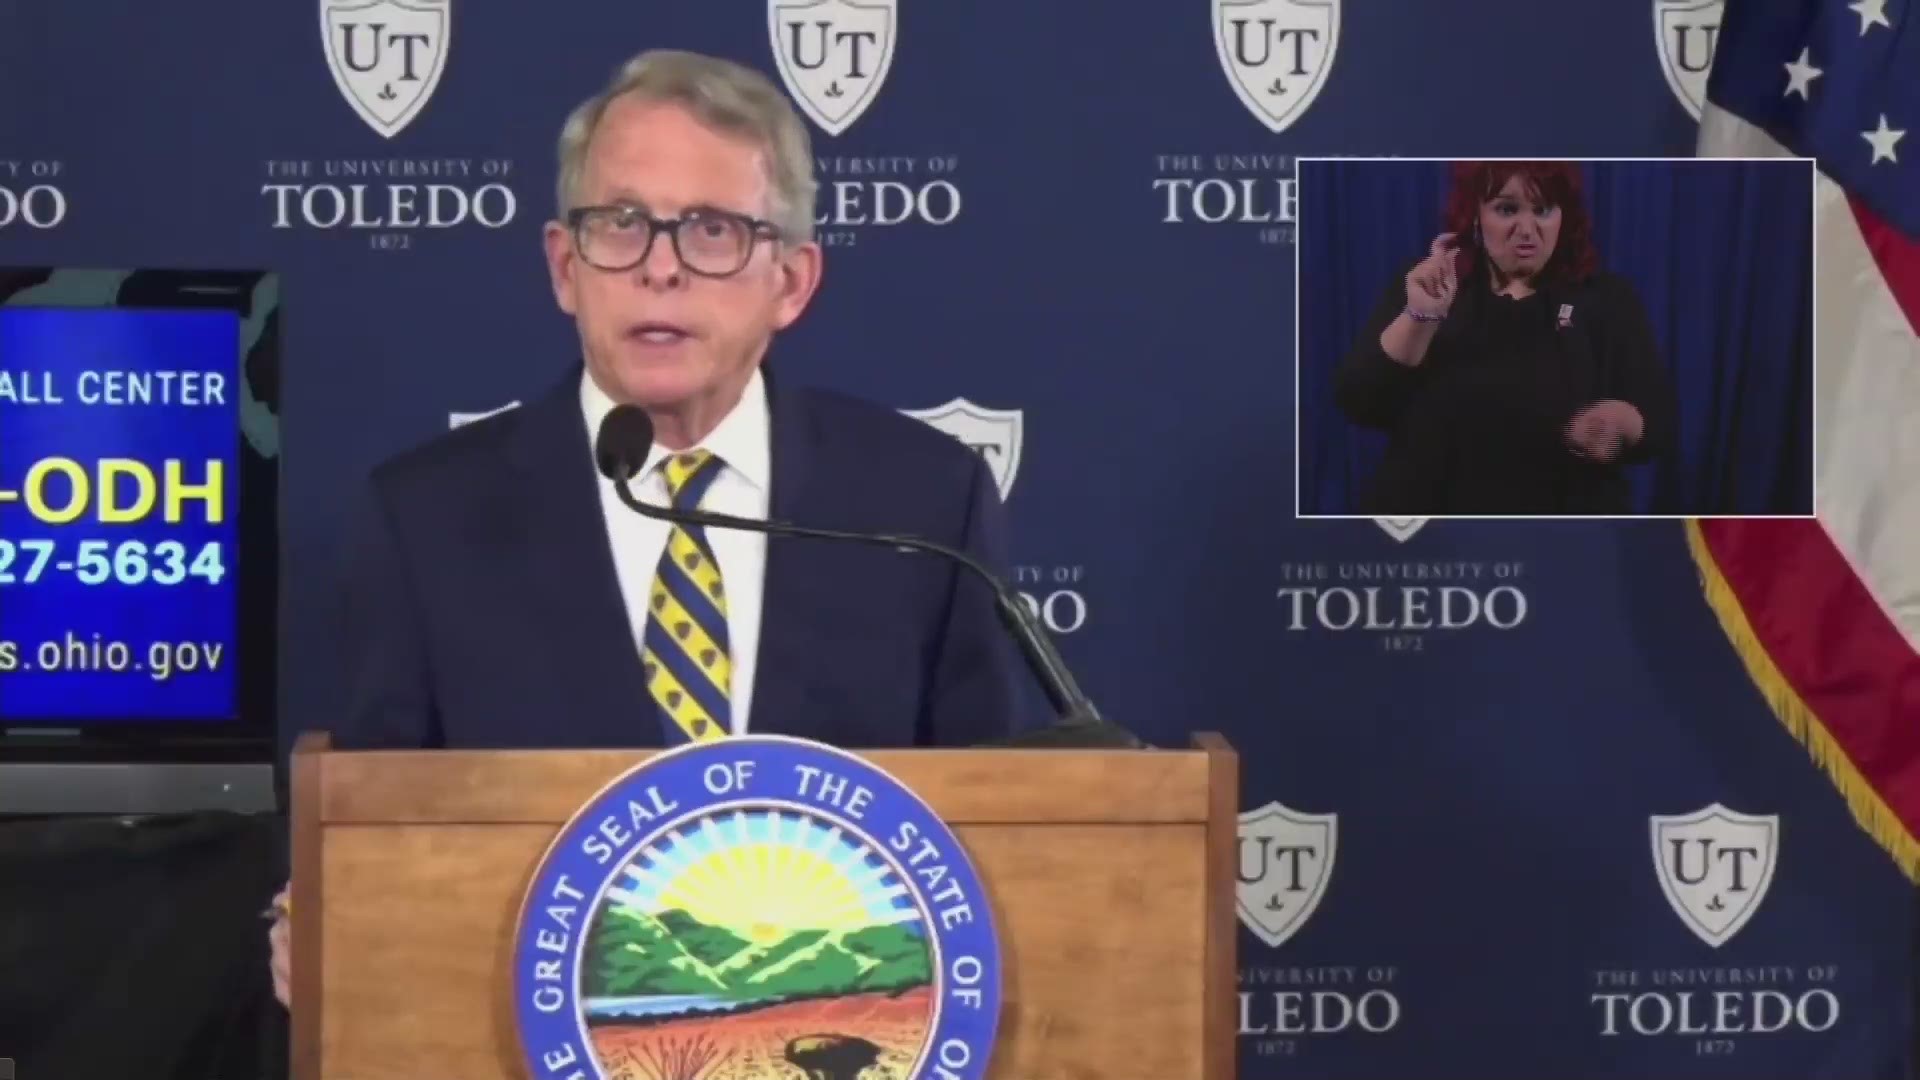 Governor DeWine says the key ingredient to everything is the vaccine. "Our ticket to a good summer is the vaccine."